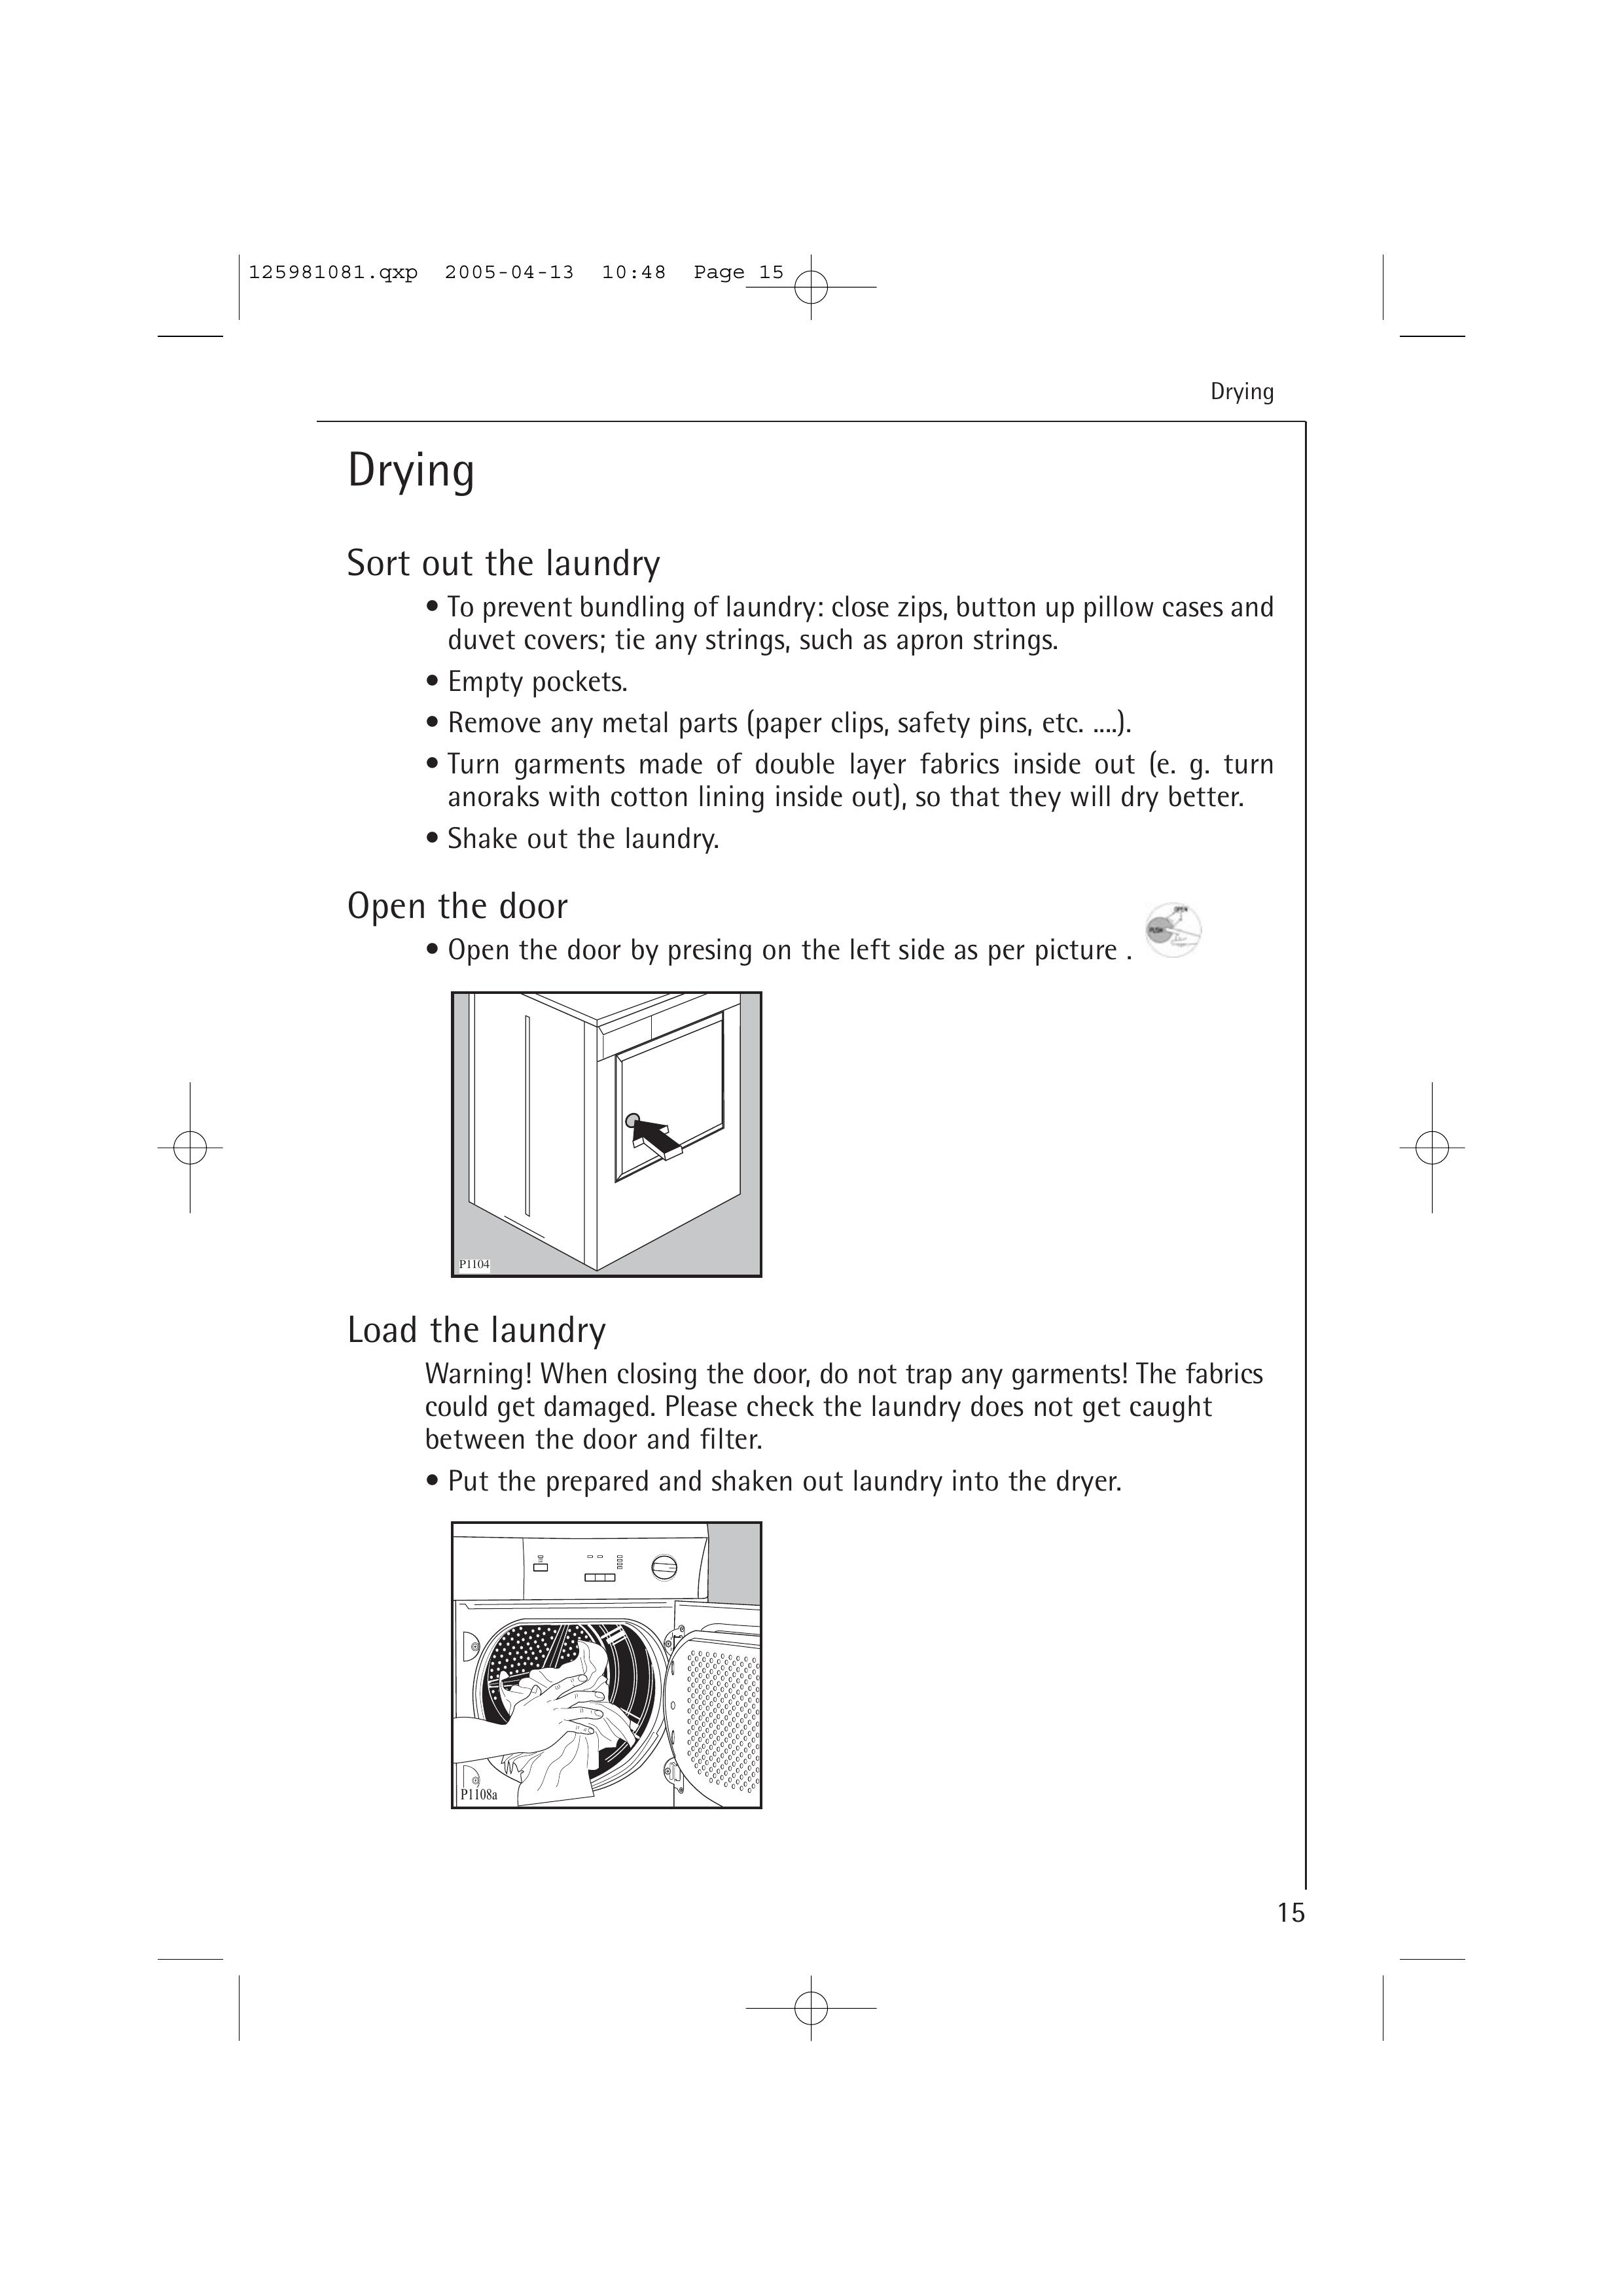 AEG T37400 Clothes Dryer User Manual (Page 15)